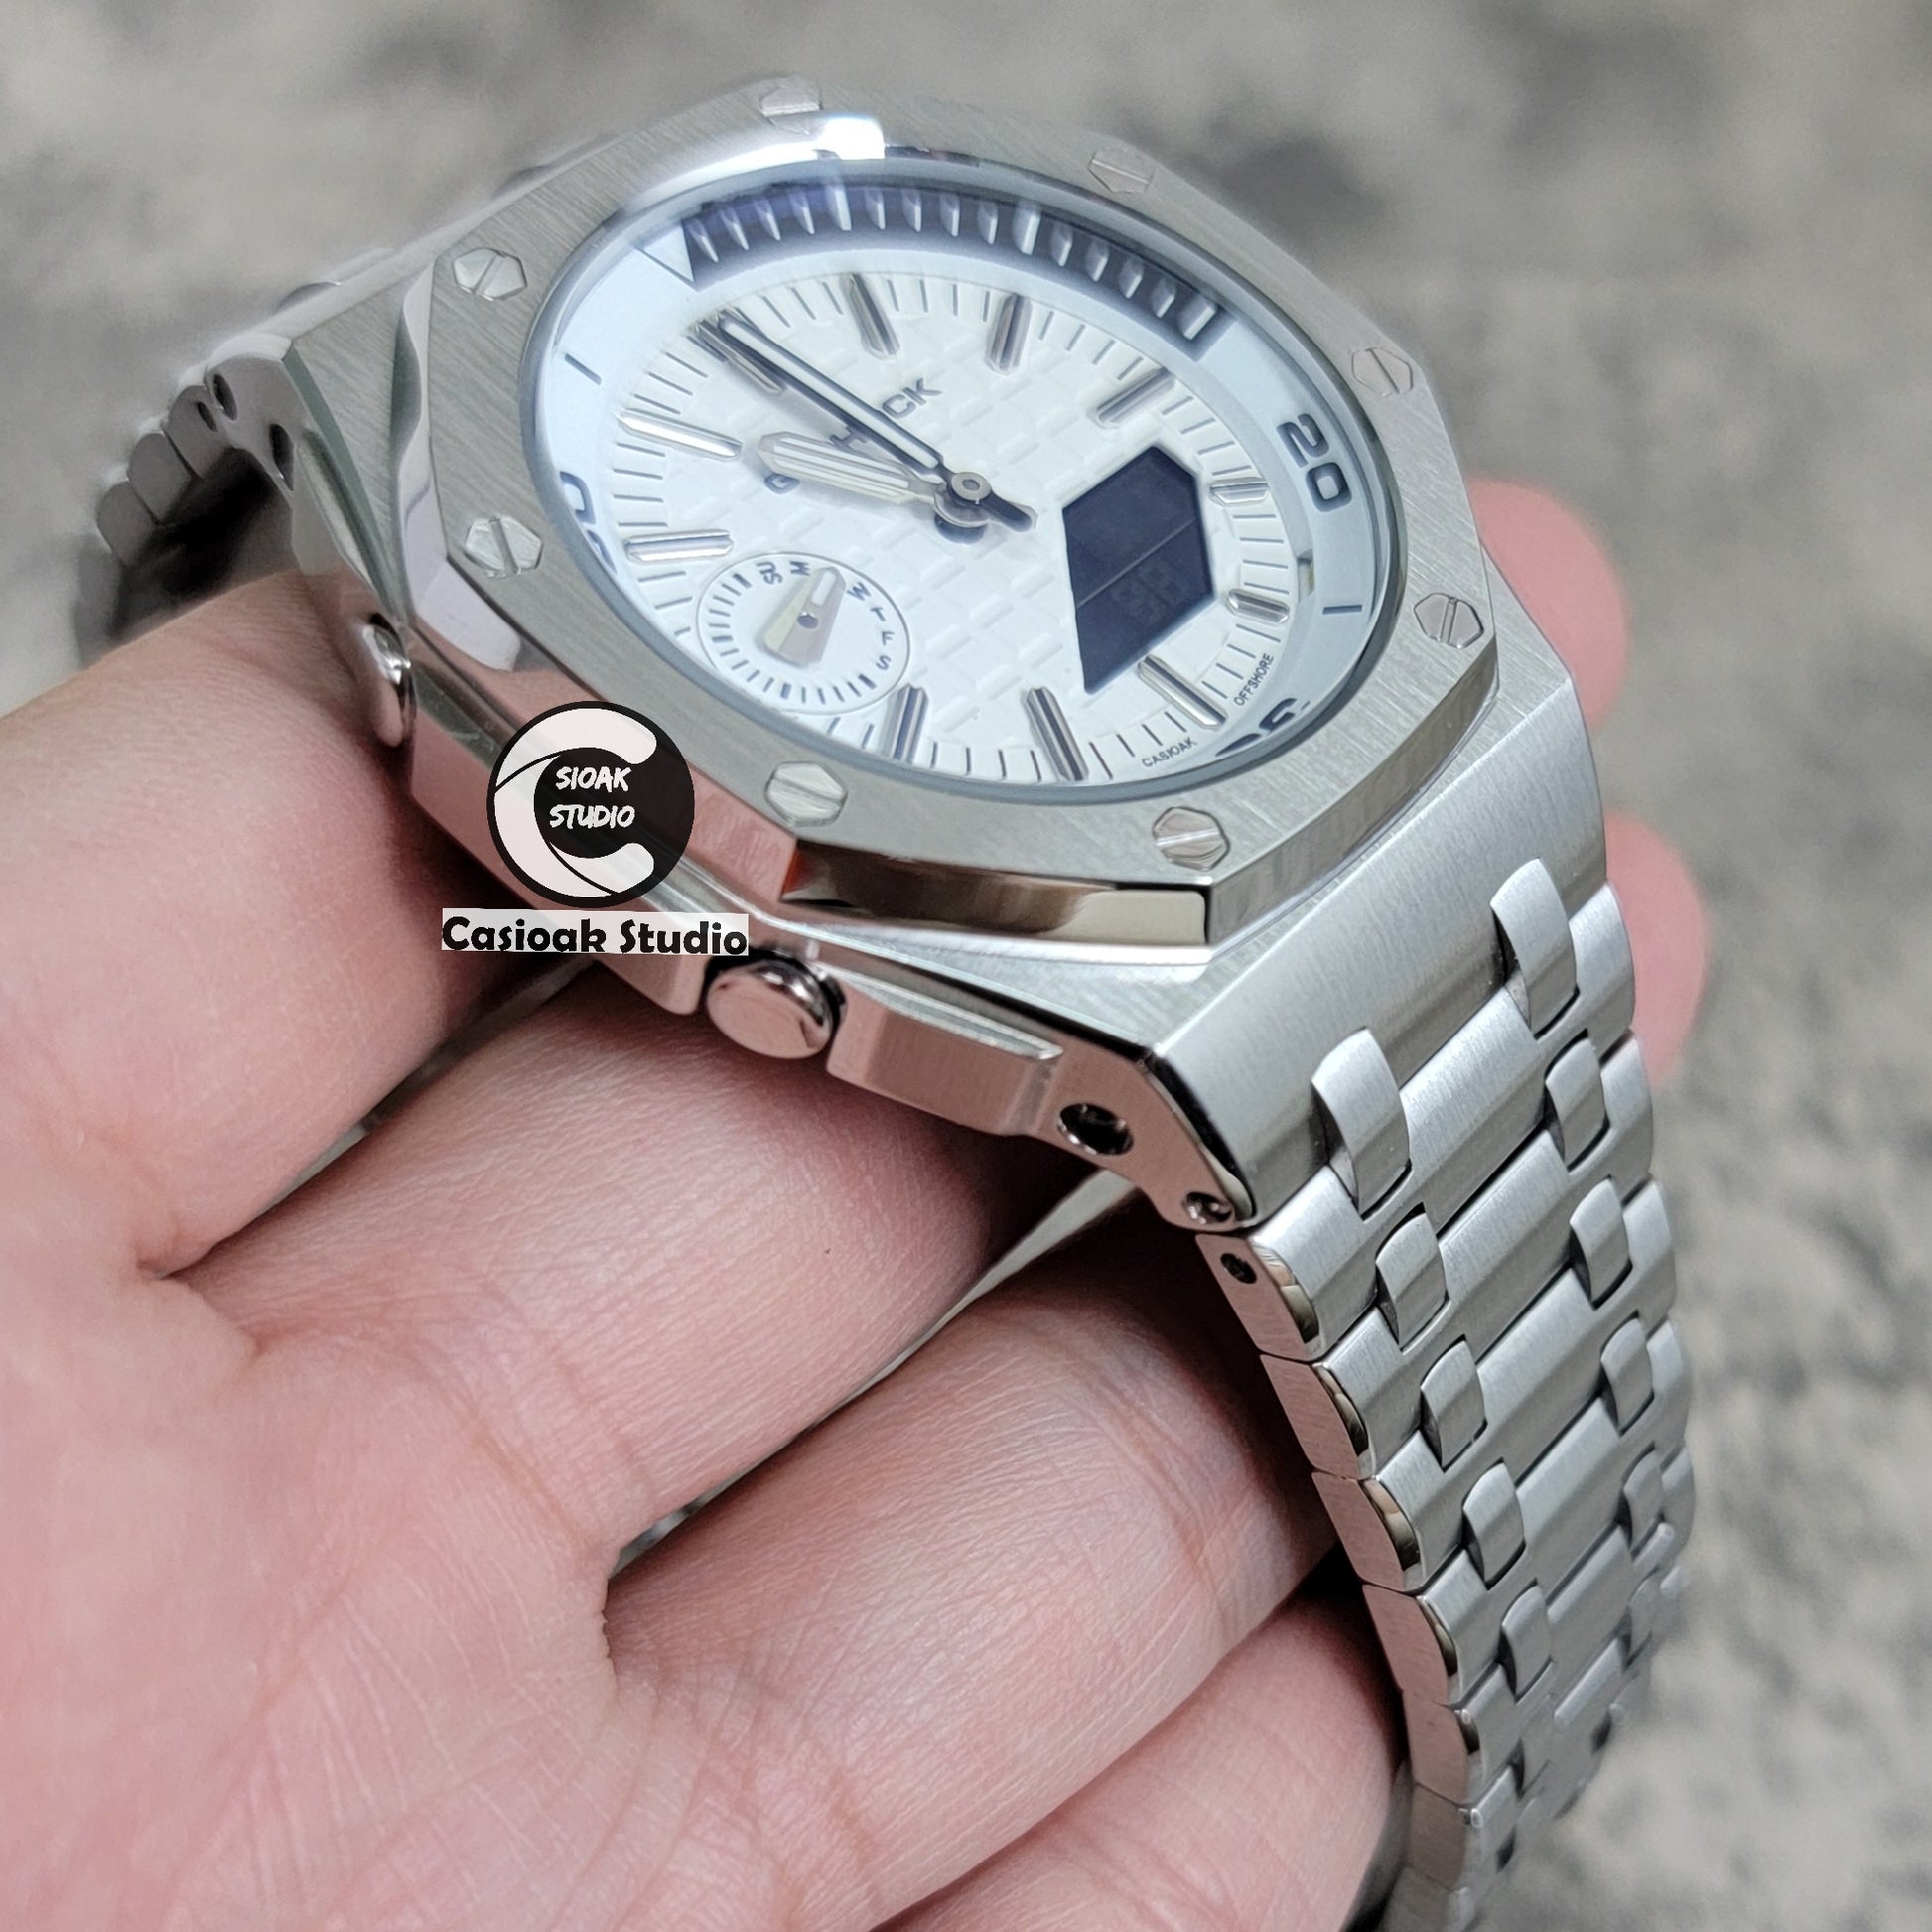 Casioak Mod Watch NEW Offshore Superior Silver Case Metal Strap Silver Time Mark White Dial 44mm Sapphire Crystal Sapphire Glass - Casioak Studio